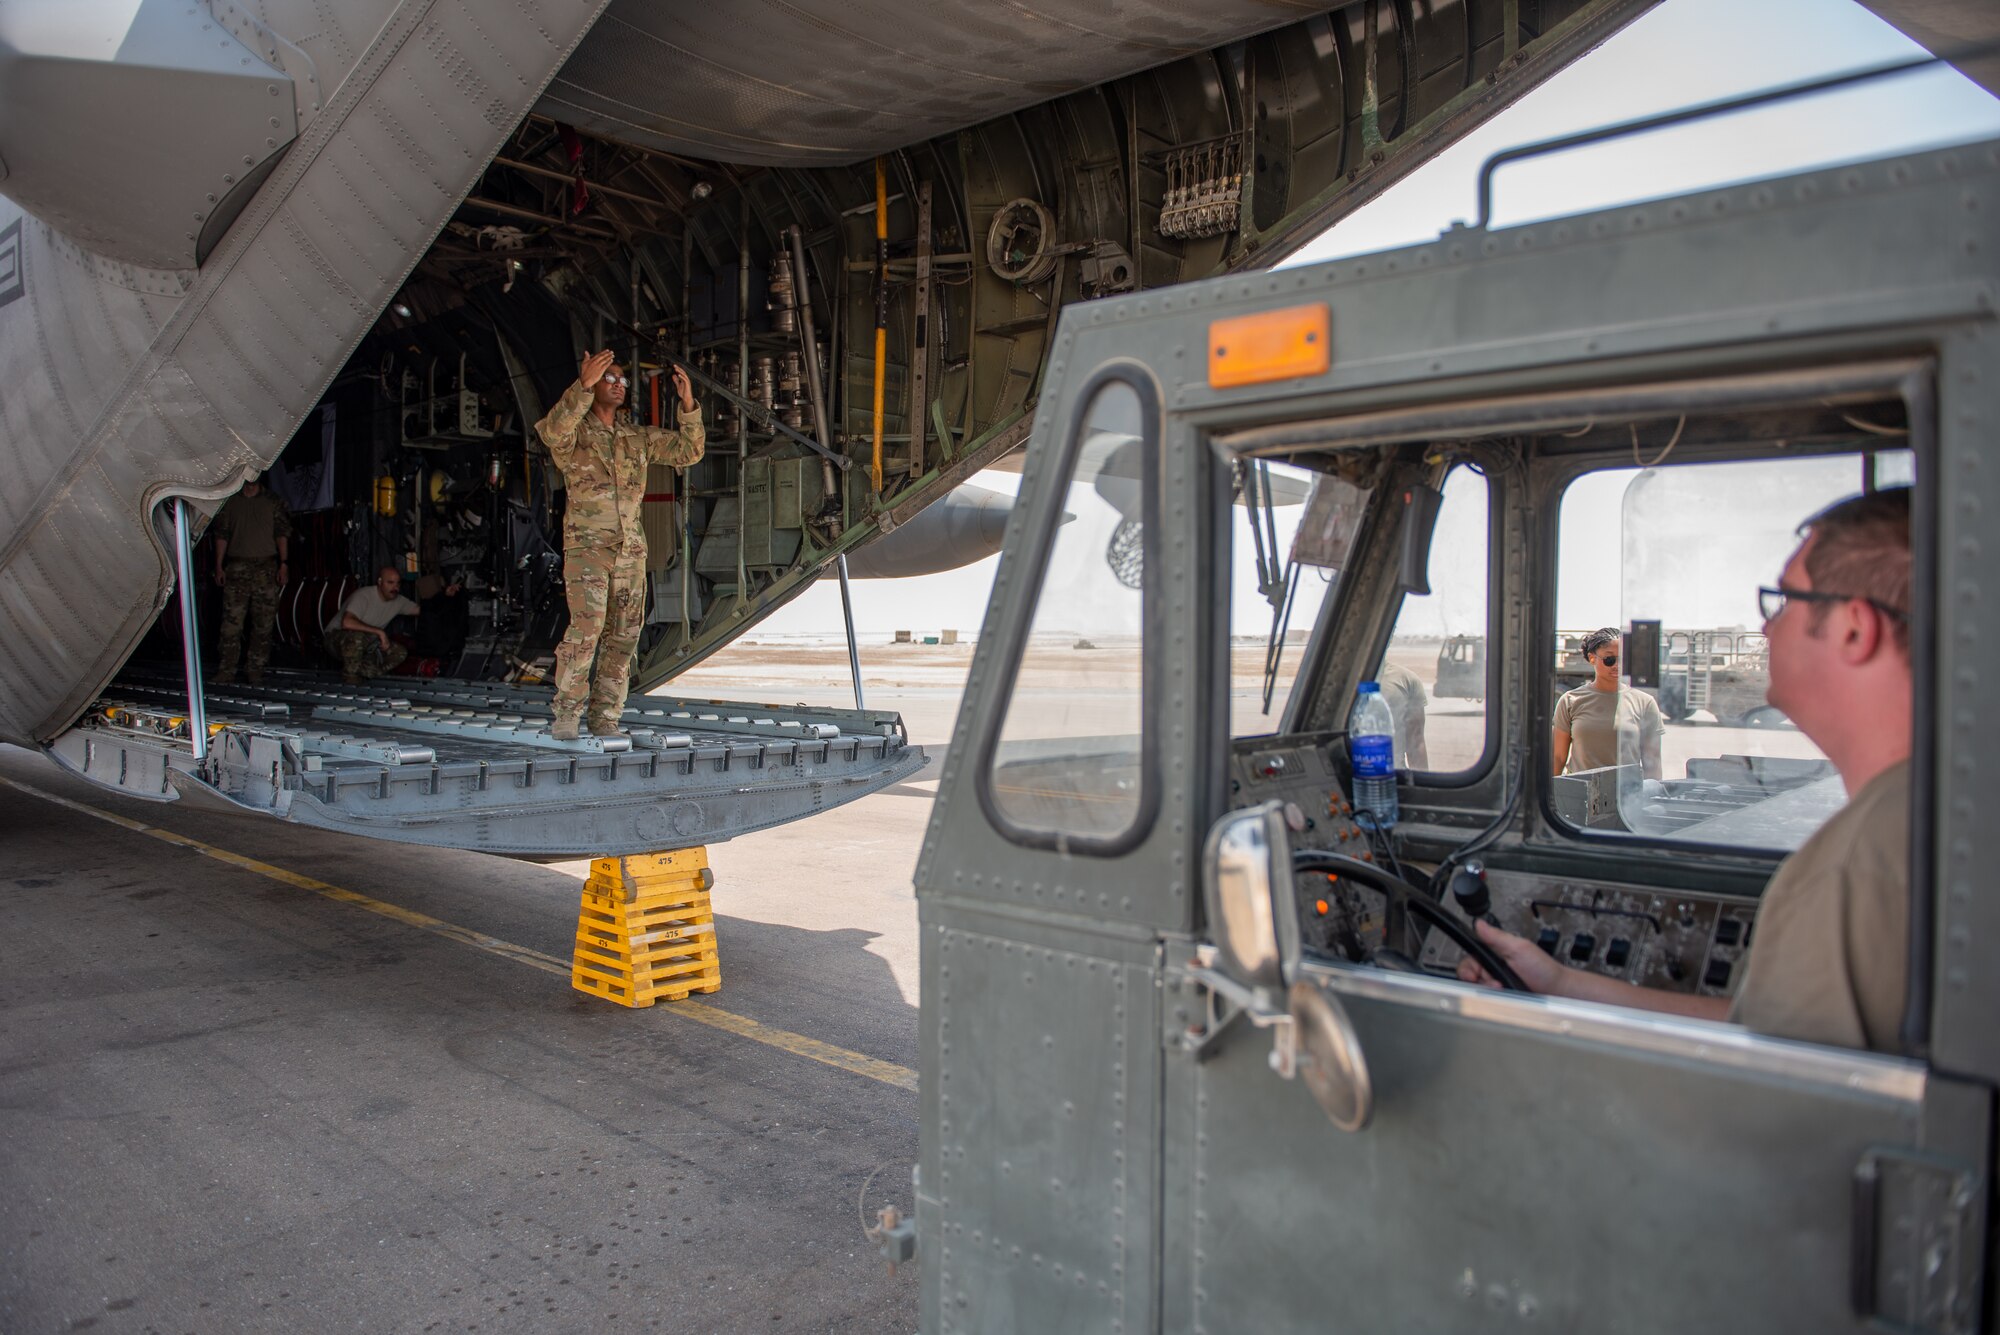 Senior Airman Andrew Williams, 380th Expeditionary Logistics Readiness Squadron air transportation specialist, drives a K-Loader with cargo up to a C-130 Hercules Sept. 17, 2019, at Al Dhafra Air Base, United Arab Emirates. The Air Transportation Operations Center enables Airmen to travel and fulfill duty requirements and taskings throughout the area of responsibility. (U.S. Air Force photo by Staff Sgt. Chris Thornbury)